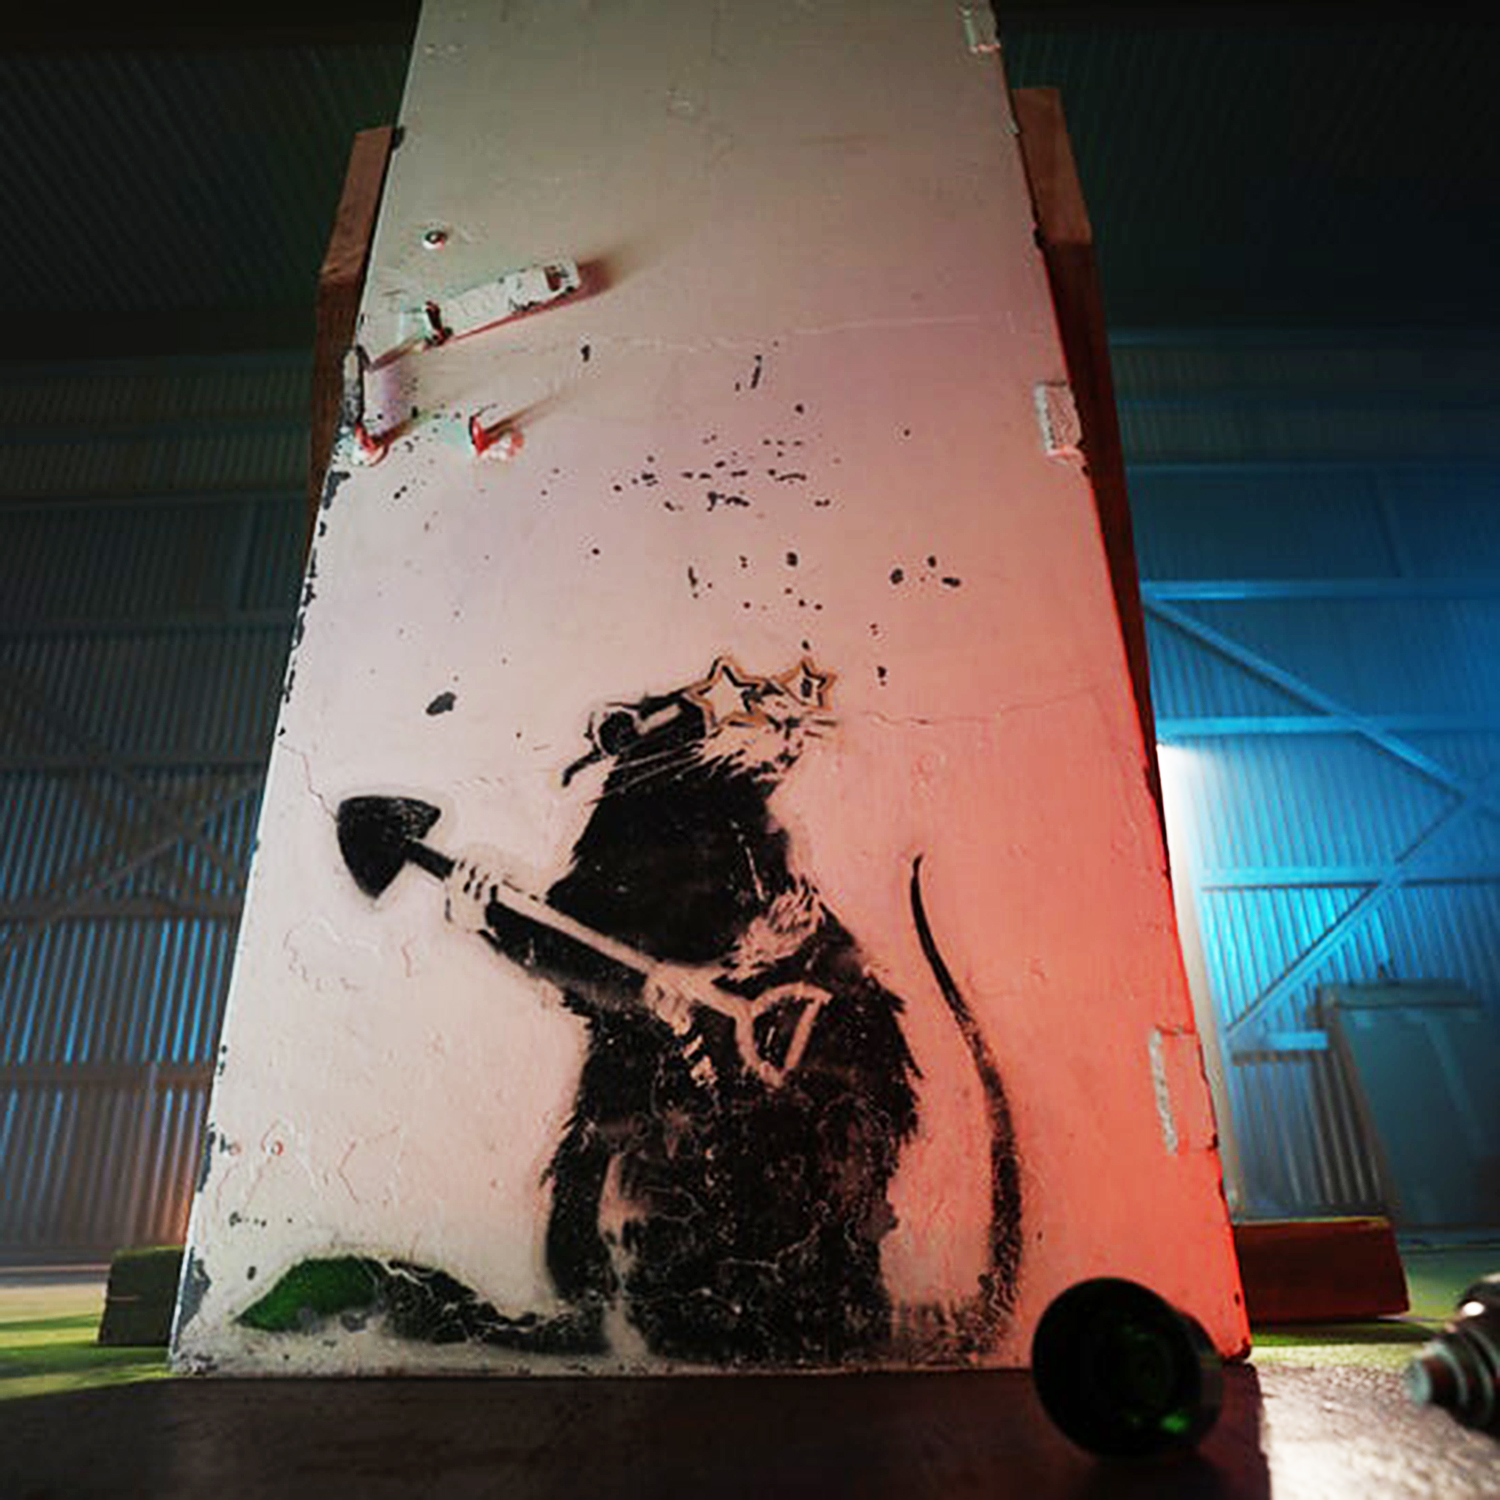 A graffiti painting of a rat is seen on a door.